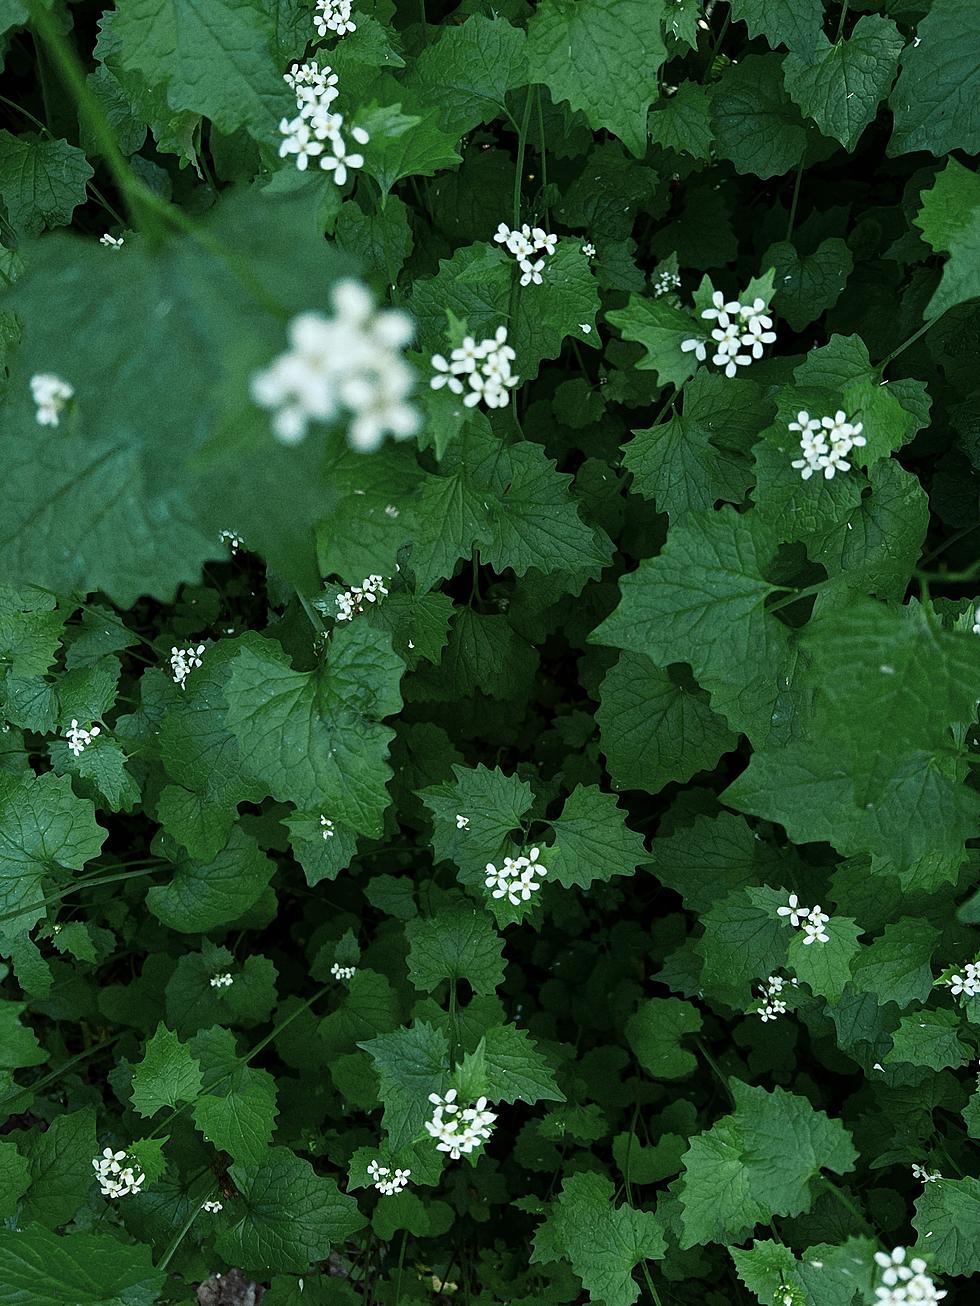 Is This Invasive Species Of Minnesota Plant Lurking In Your Yard?